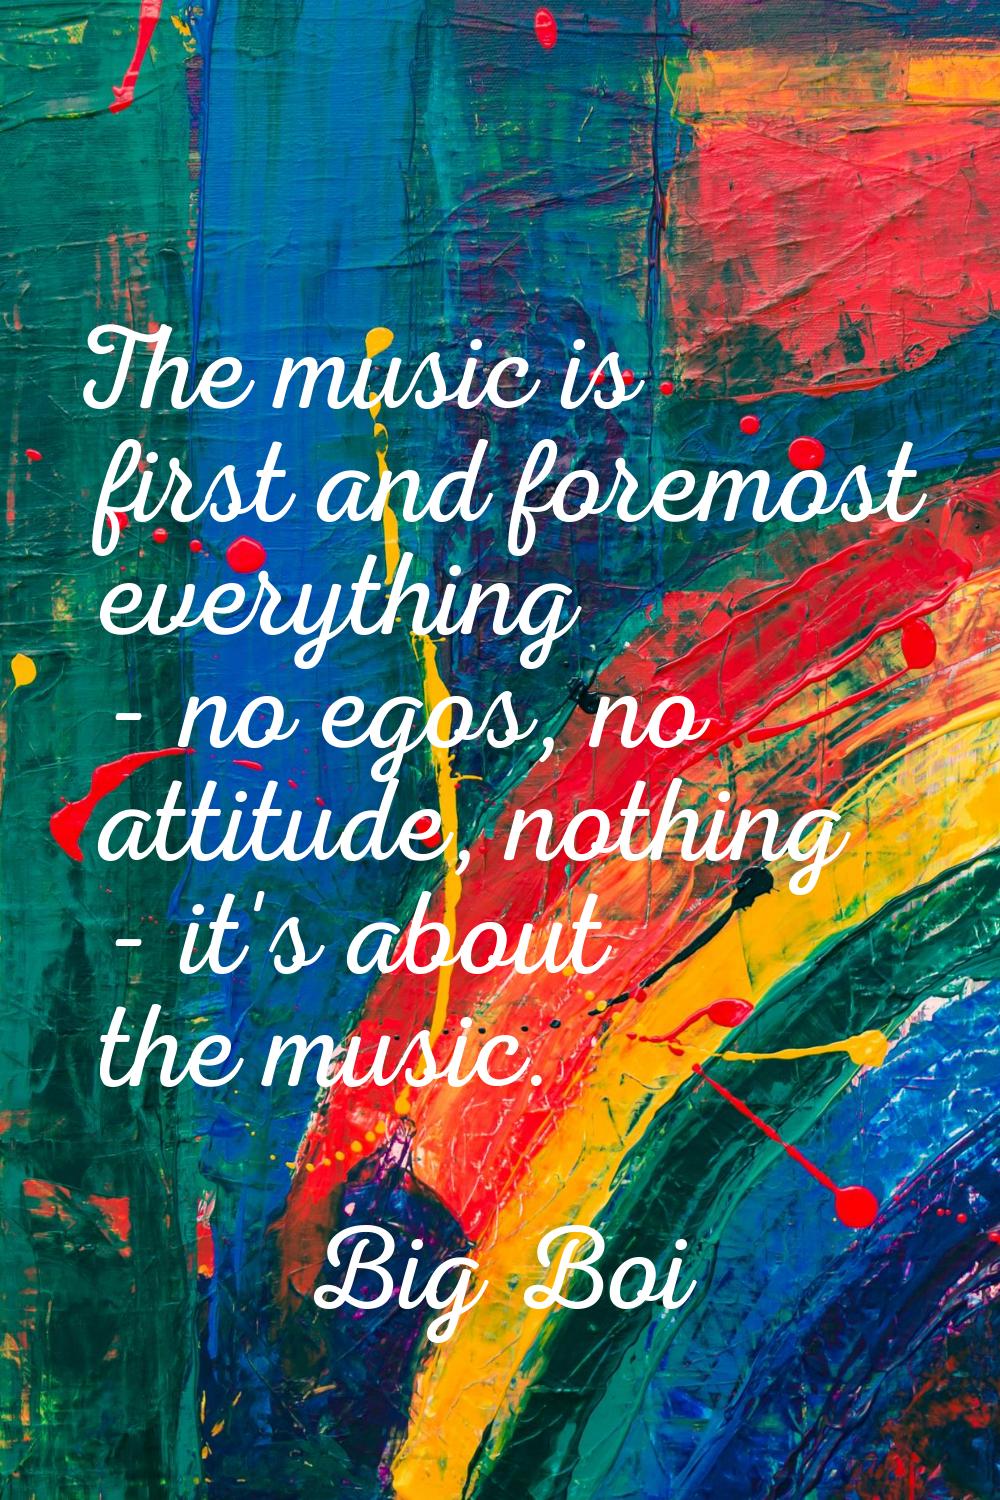 The music is first and foremost everything - no egos, no attitude, nothing - it's about the music.